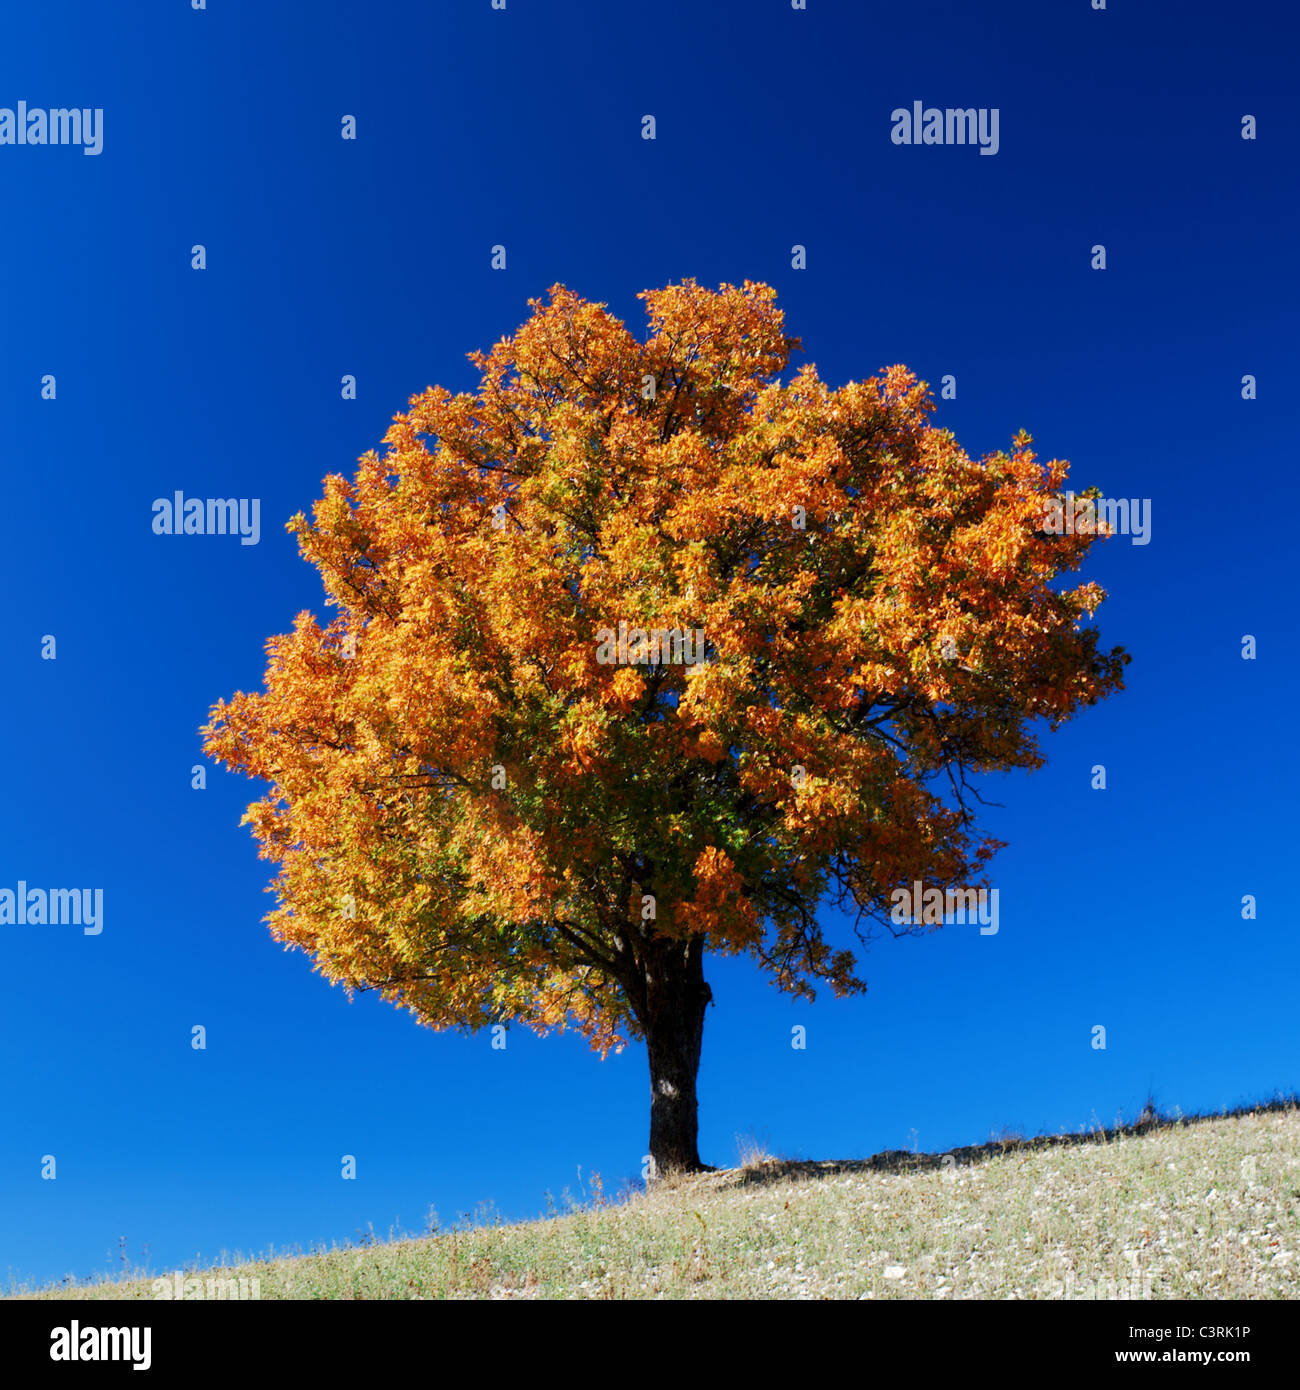 Tree in bright fall colors under clear blue sky Stock Photo